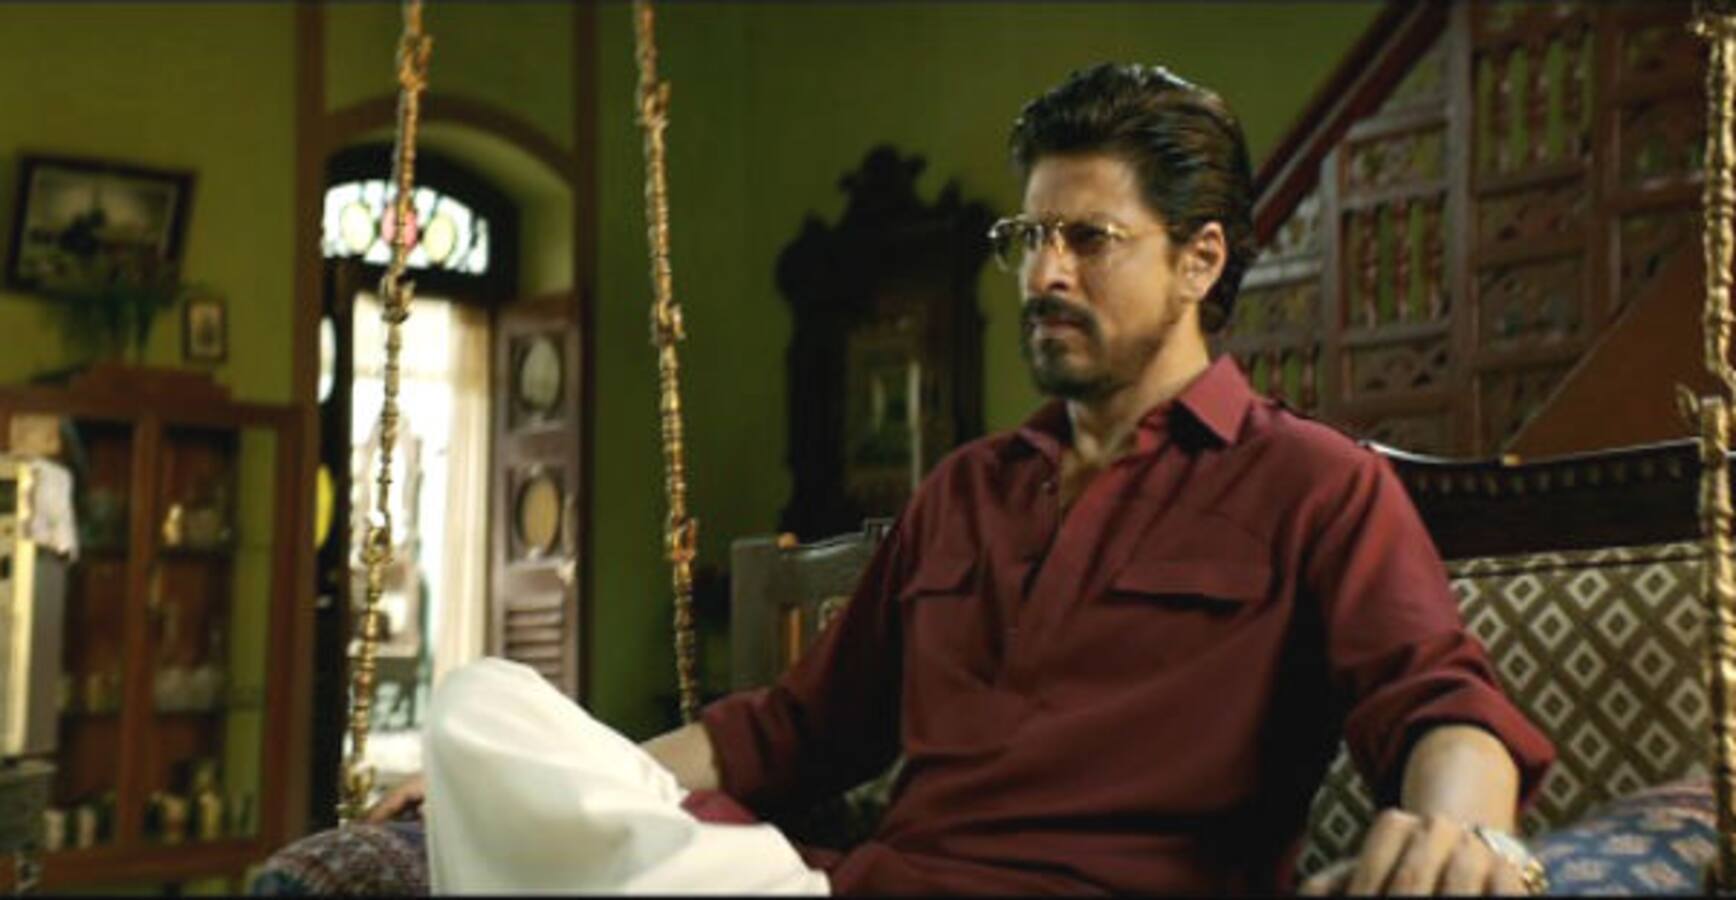 Shah Rukh Khan accused of insulting the Islamic community with Raees